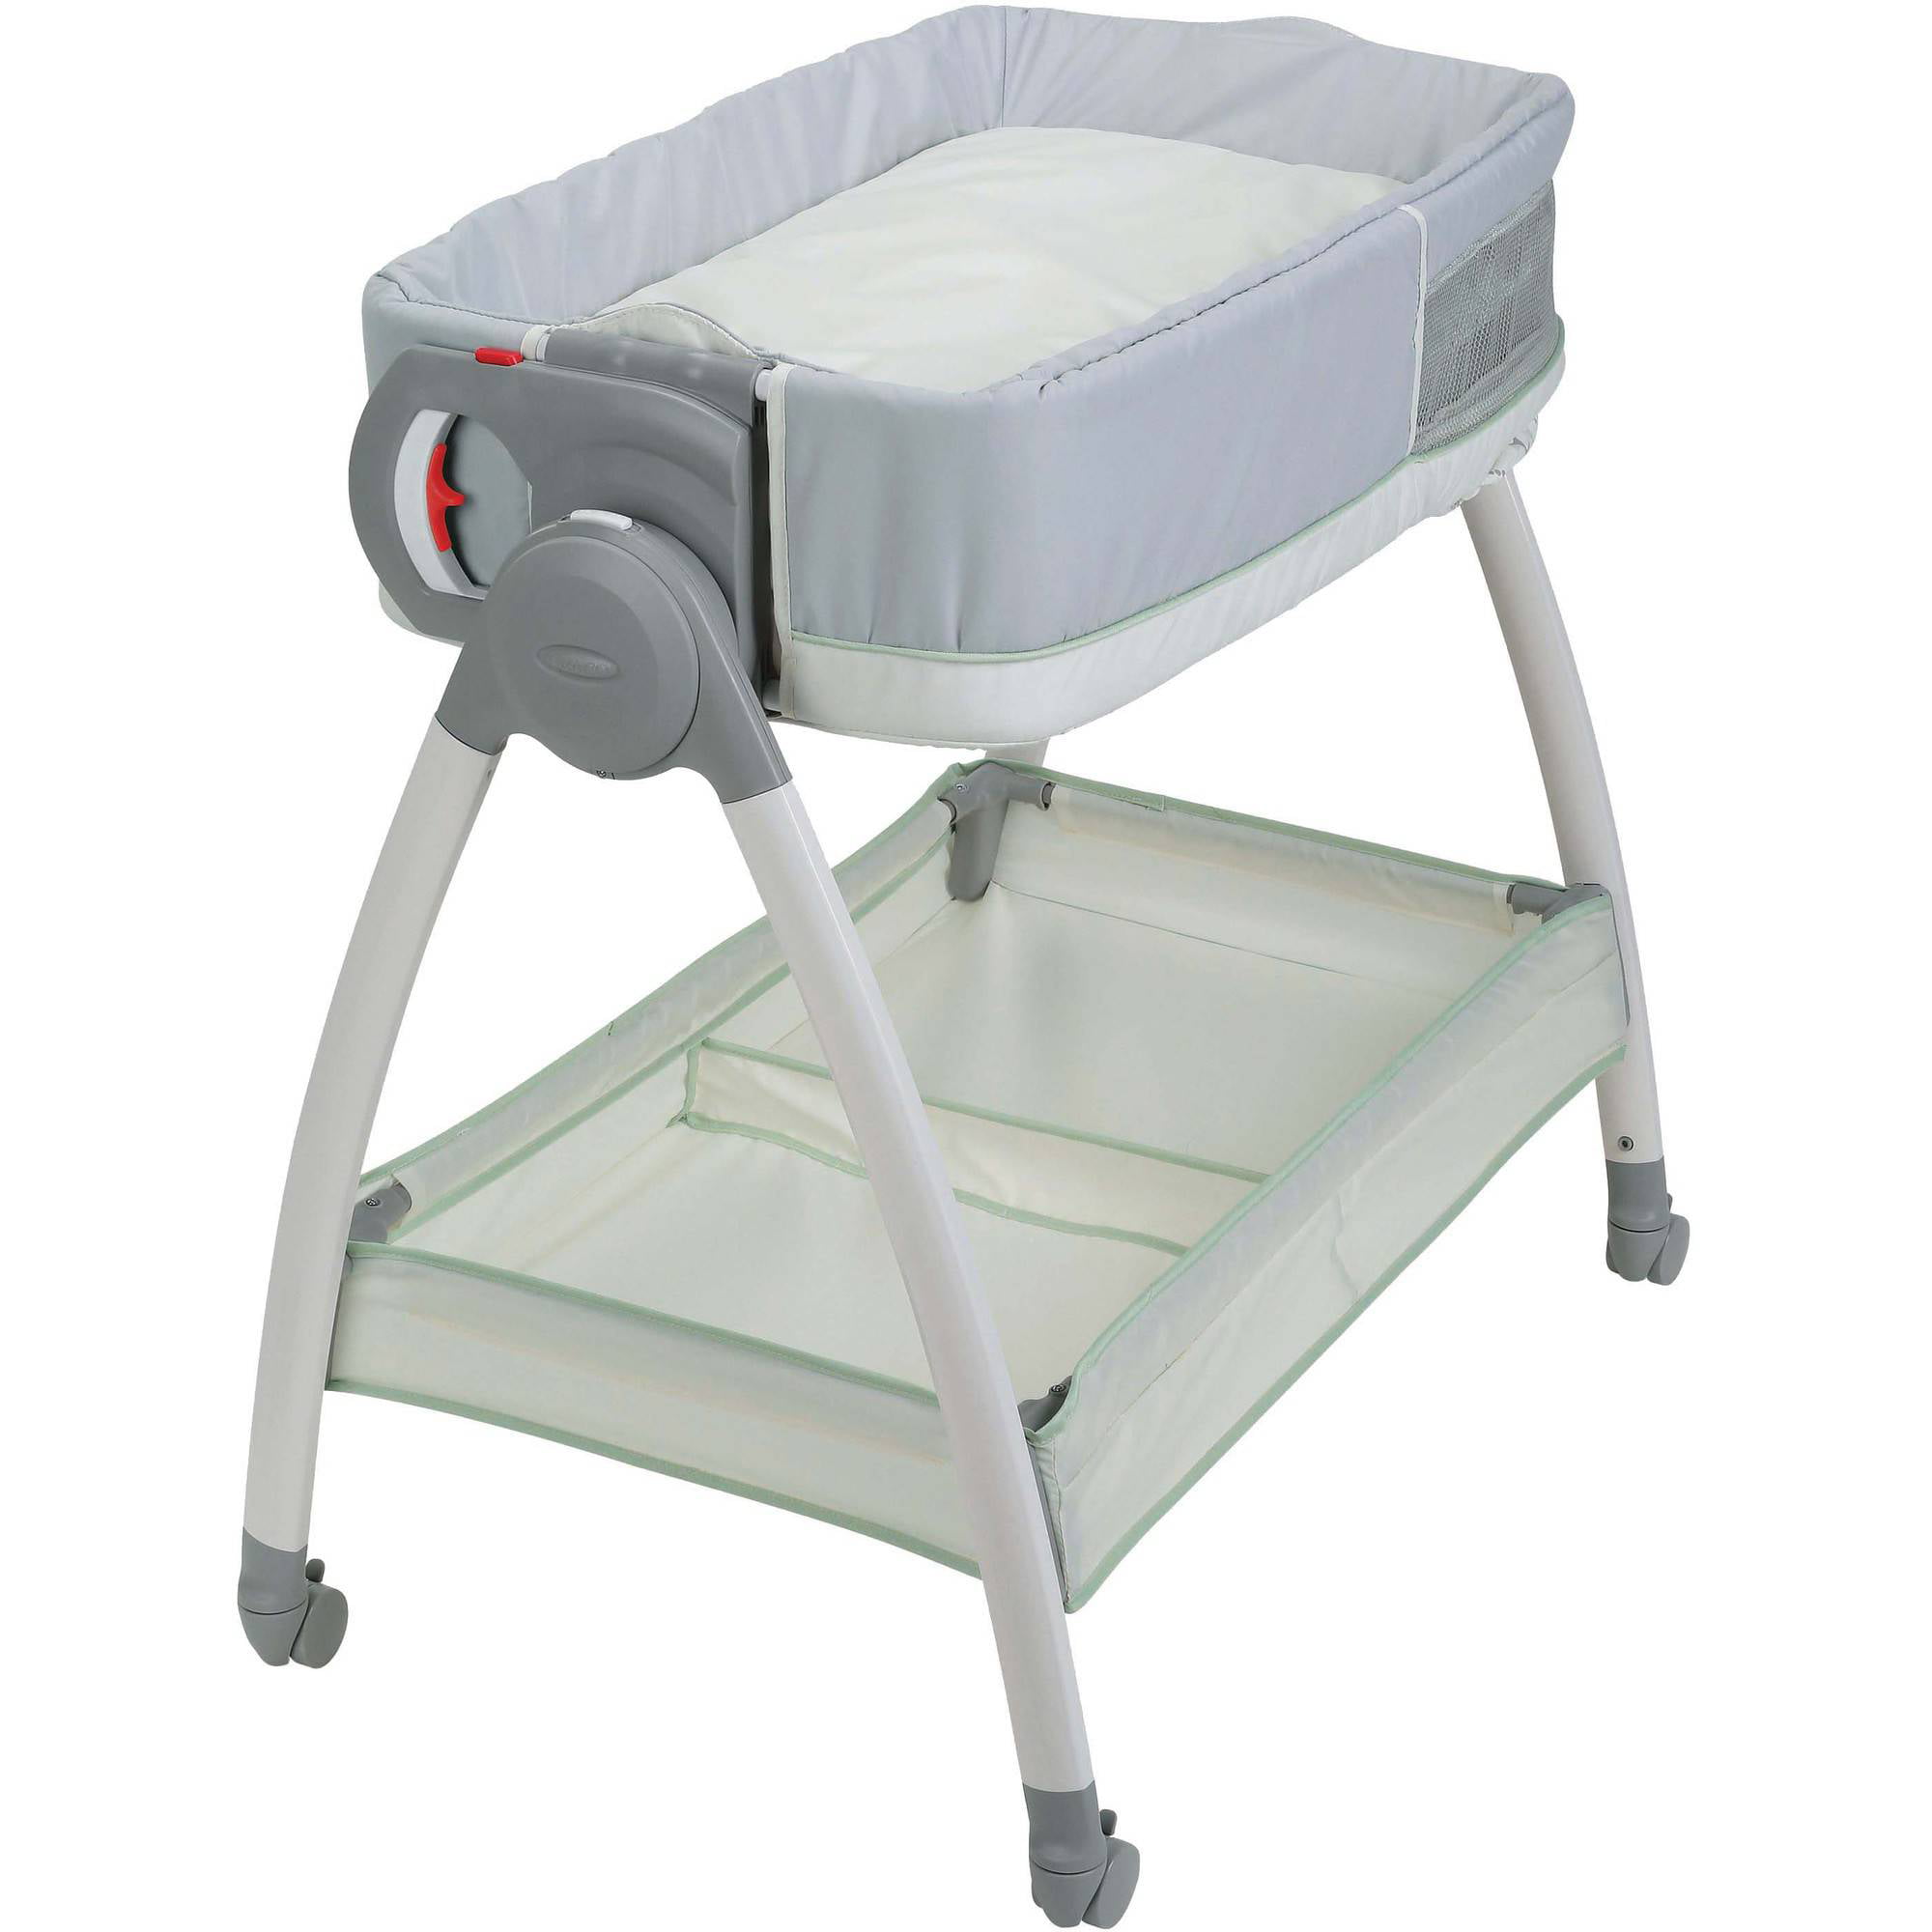 dream suite bassinet and changer